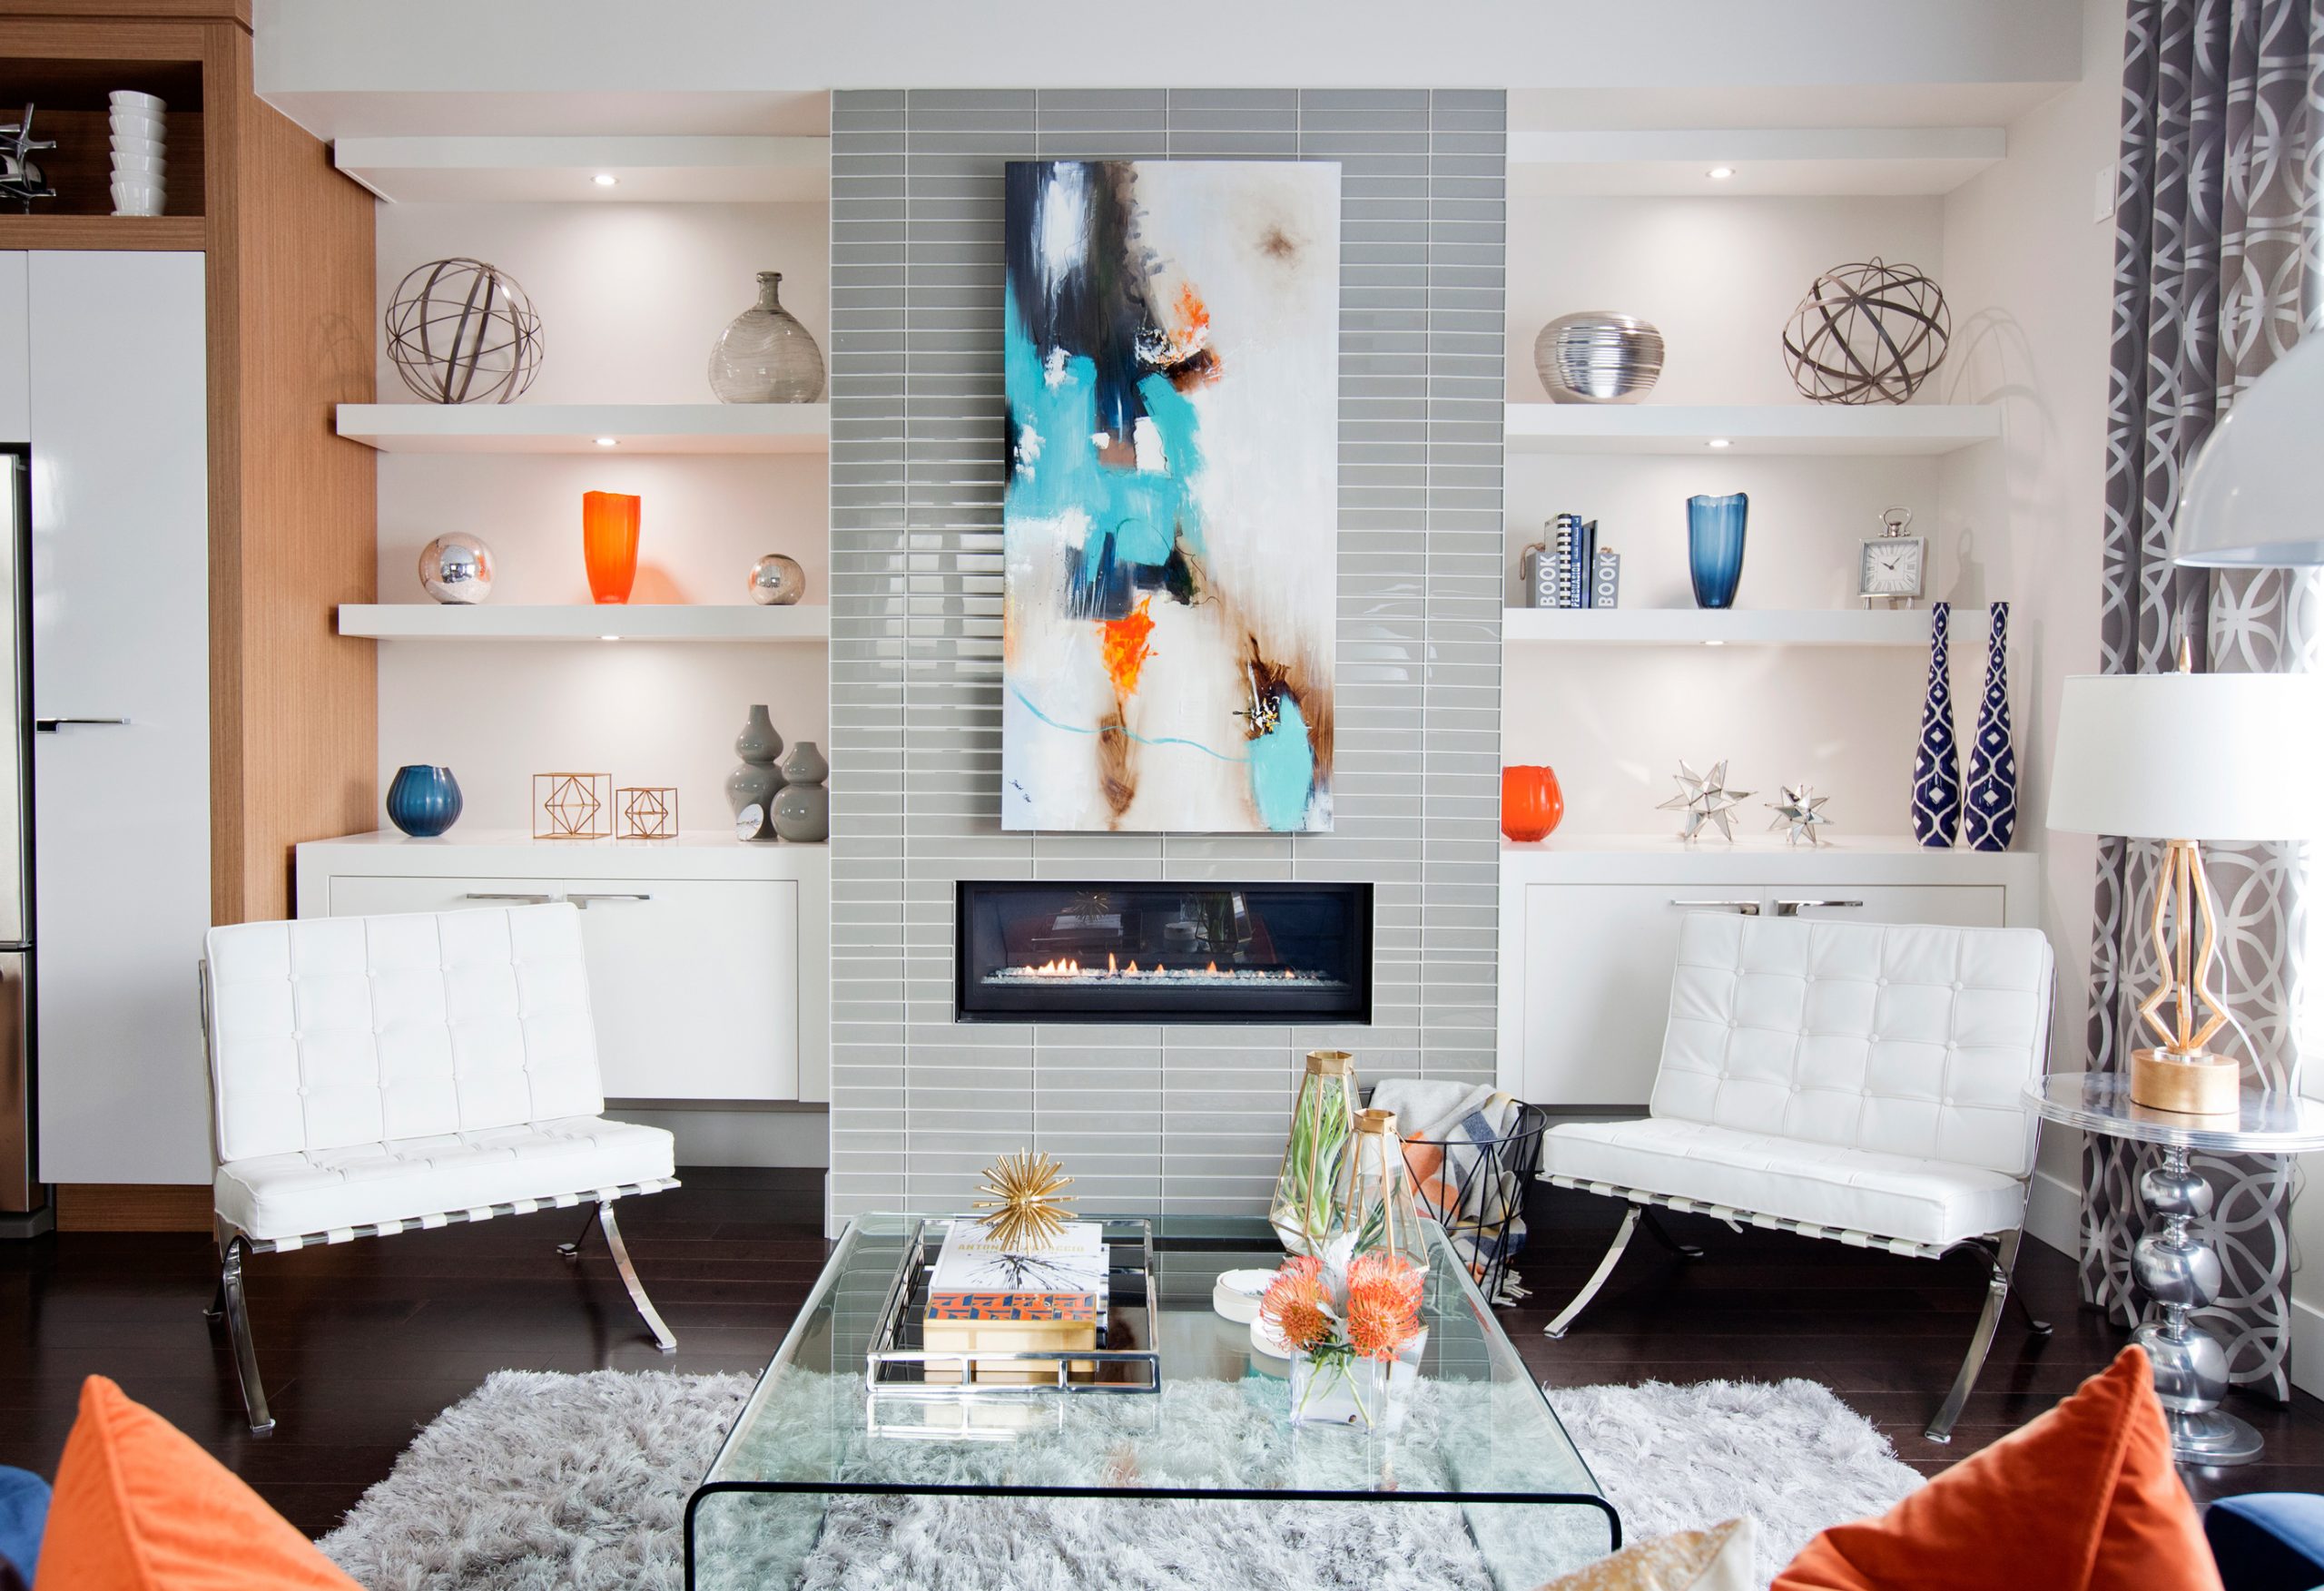 A light-filled Calgary home with bold colour and patterns.